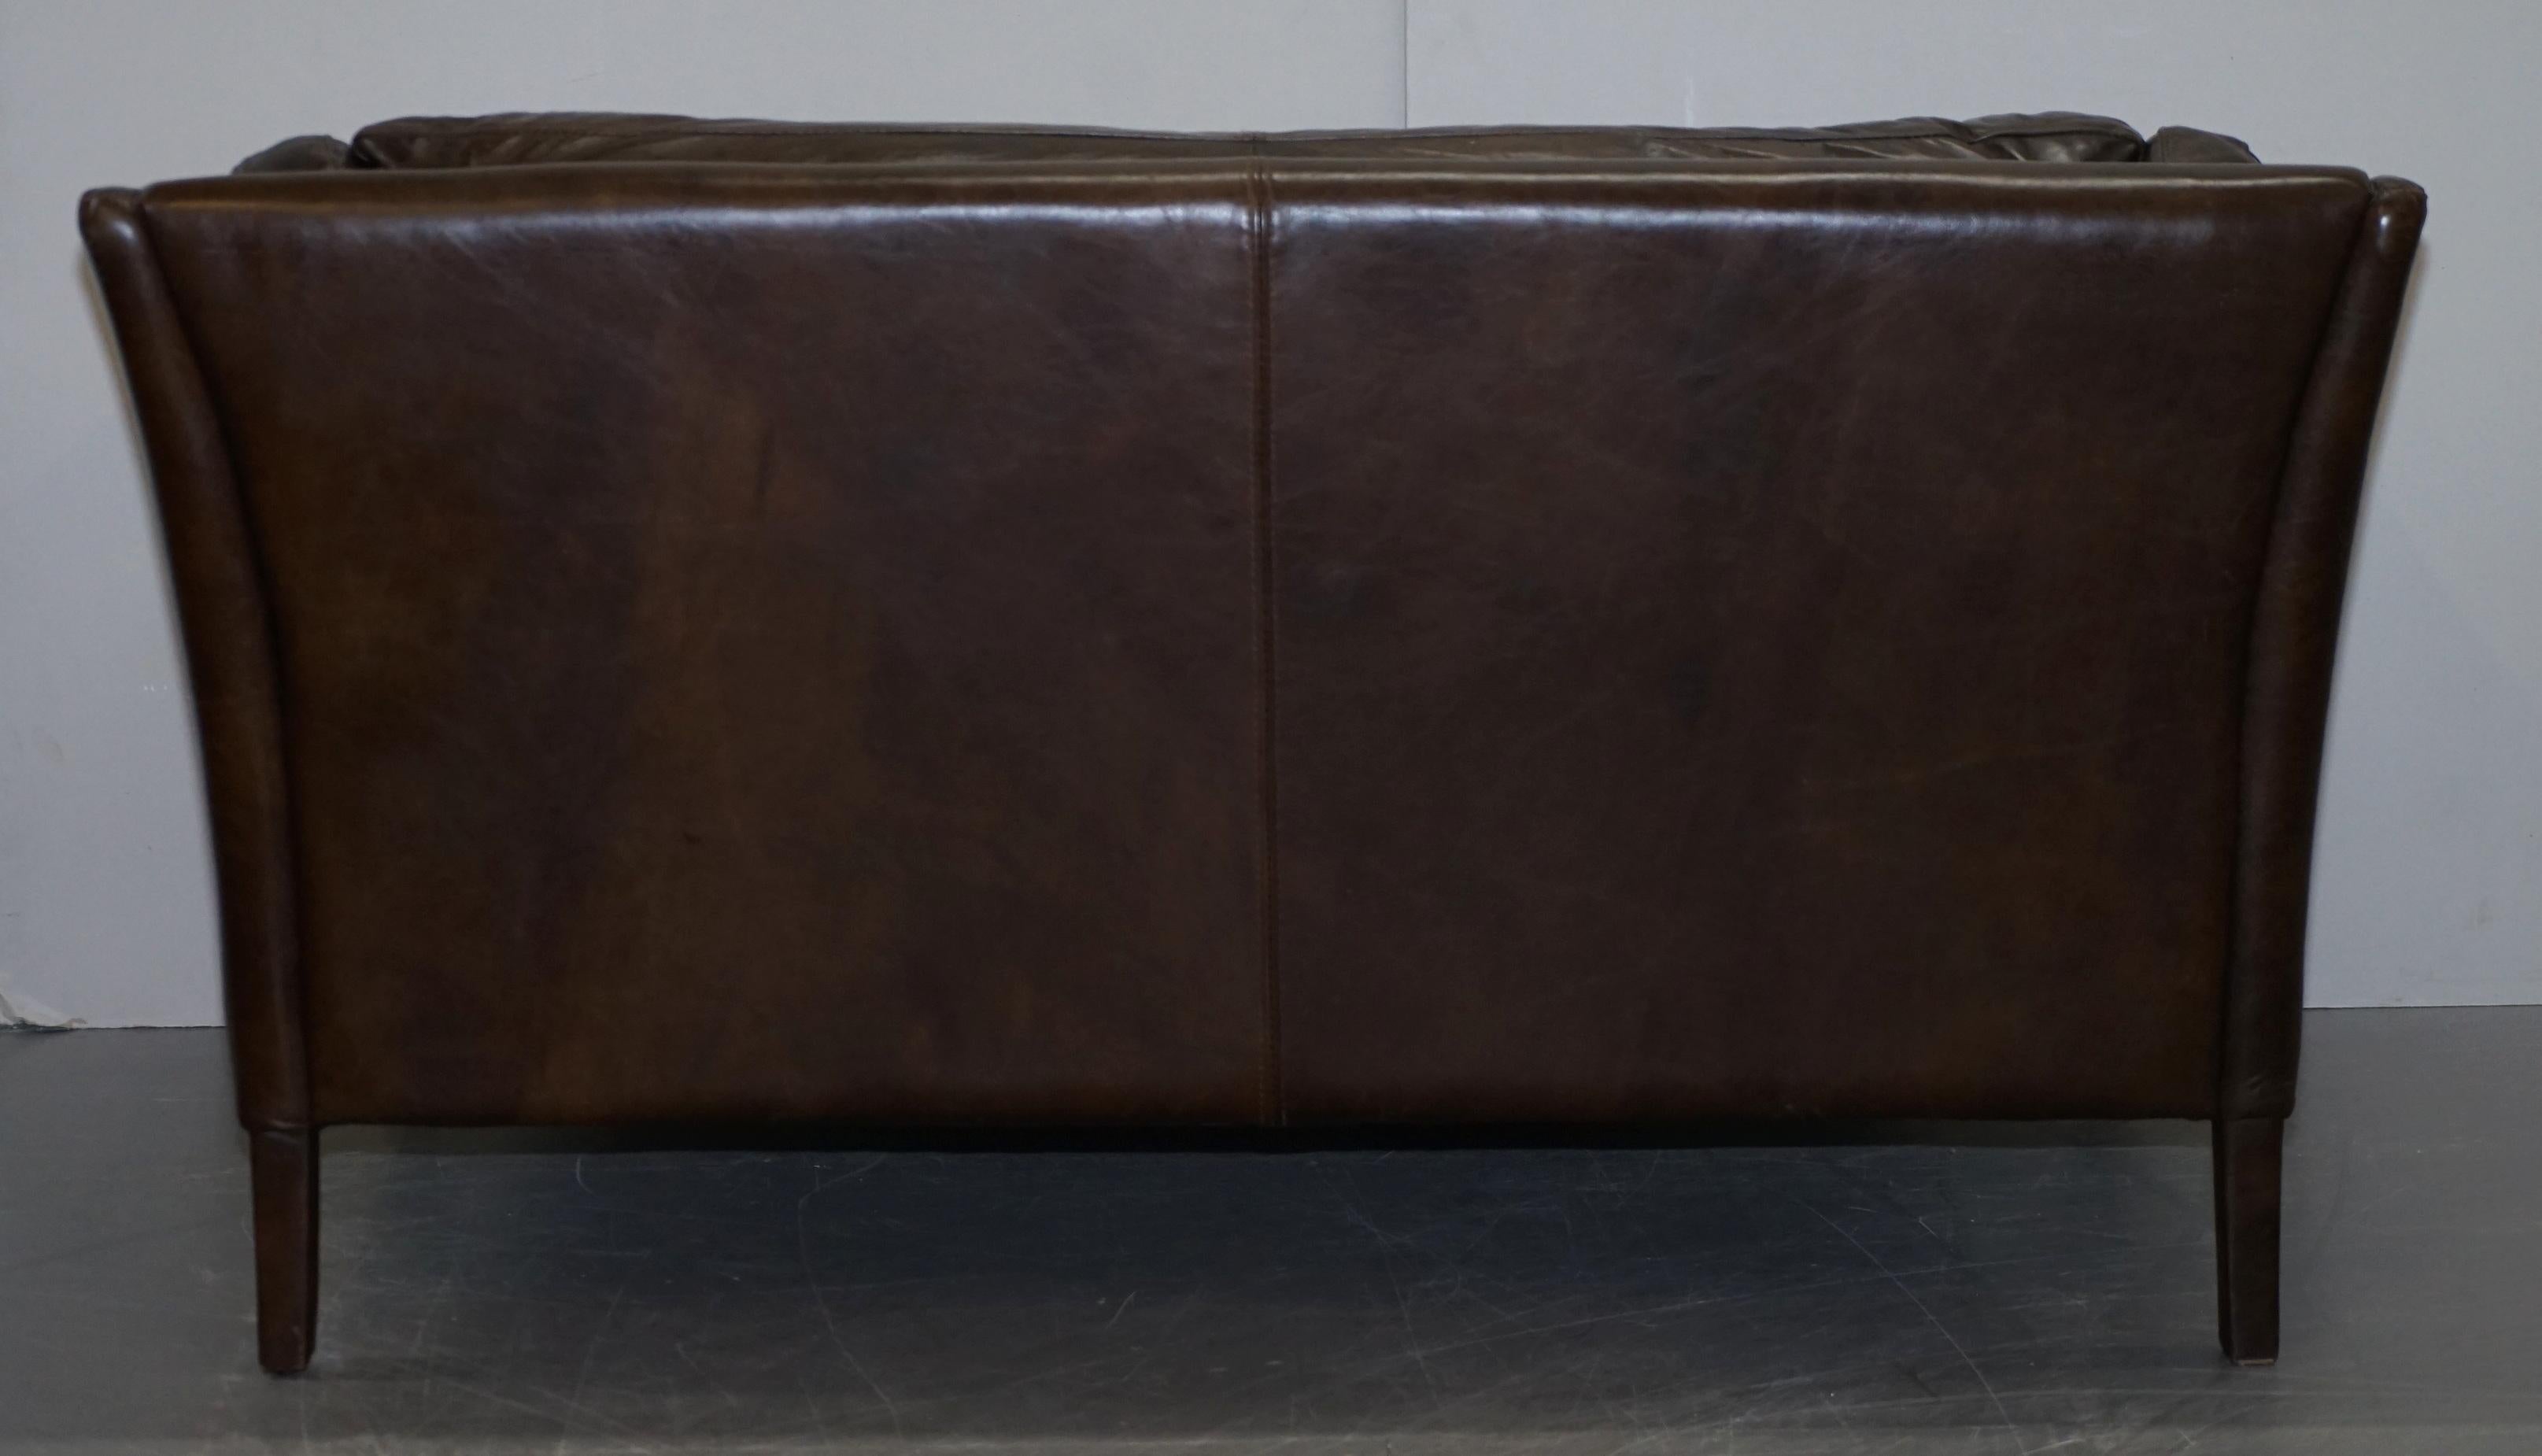 Lovely Halo Reggio Conker Brown Leather Two-Seat Sofa Very Comfortable 5